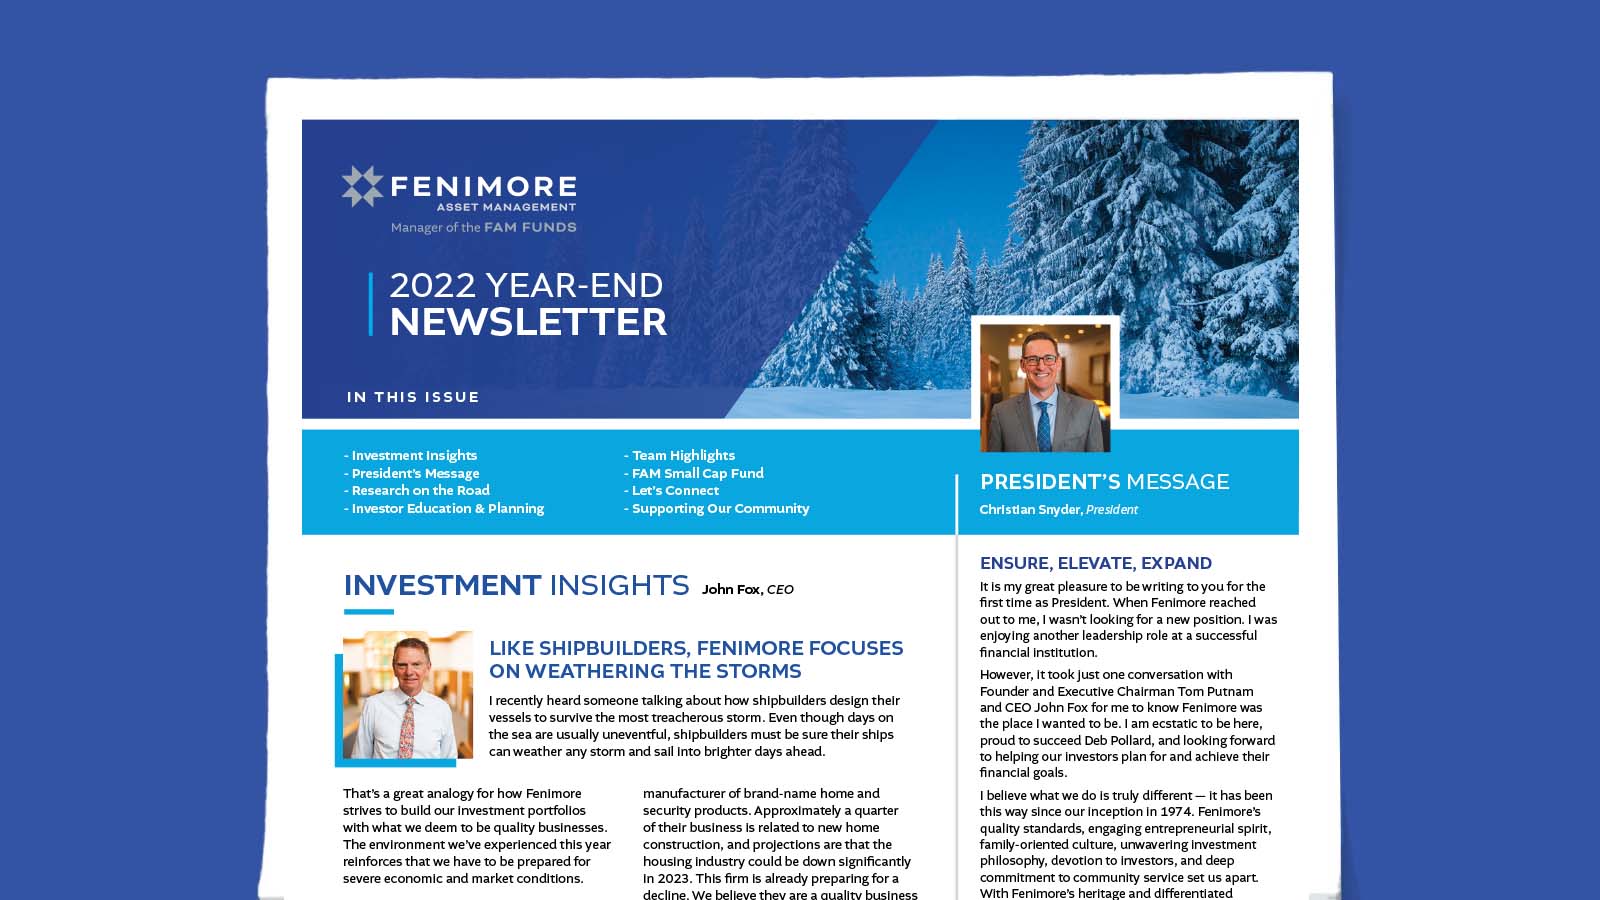 Fenimore’s 2022 Year-End Newsletter